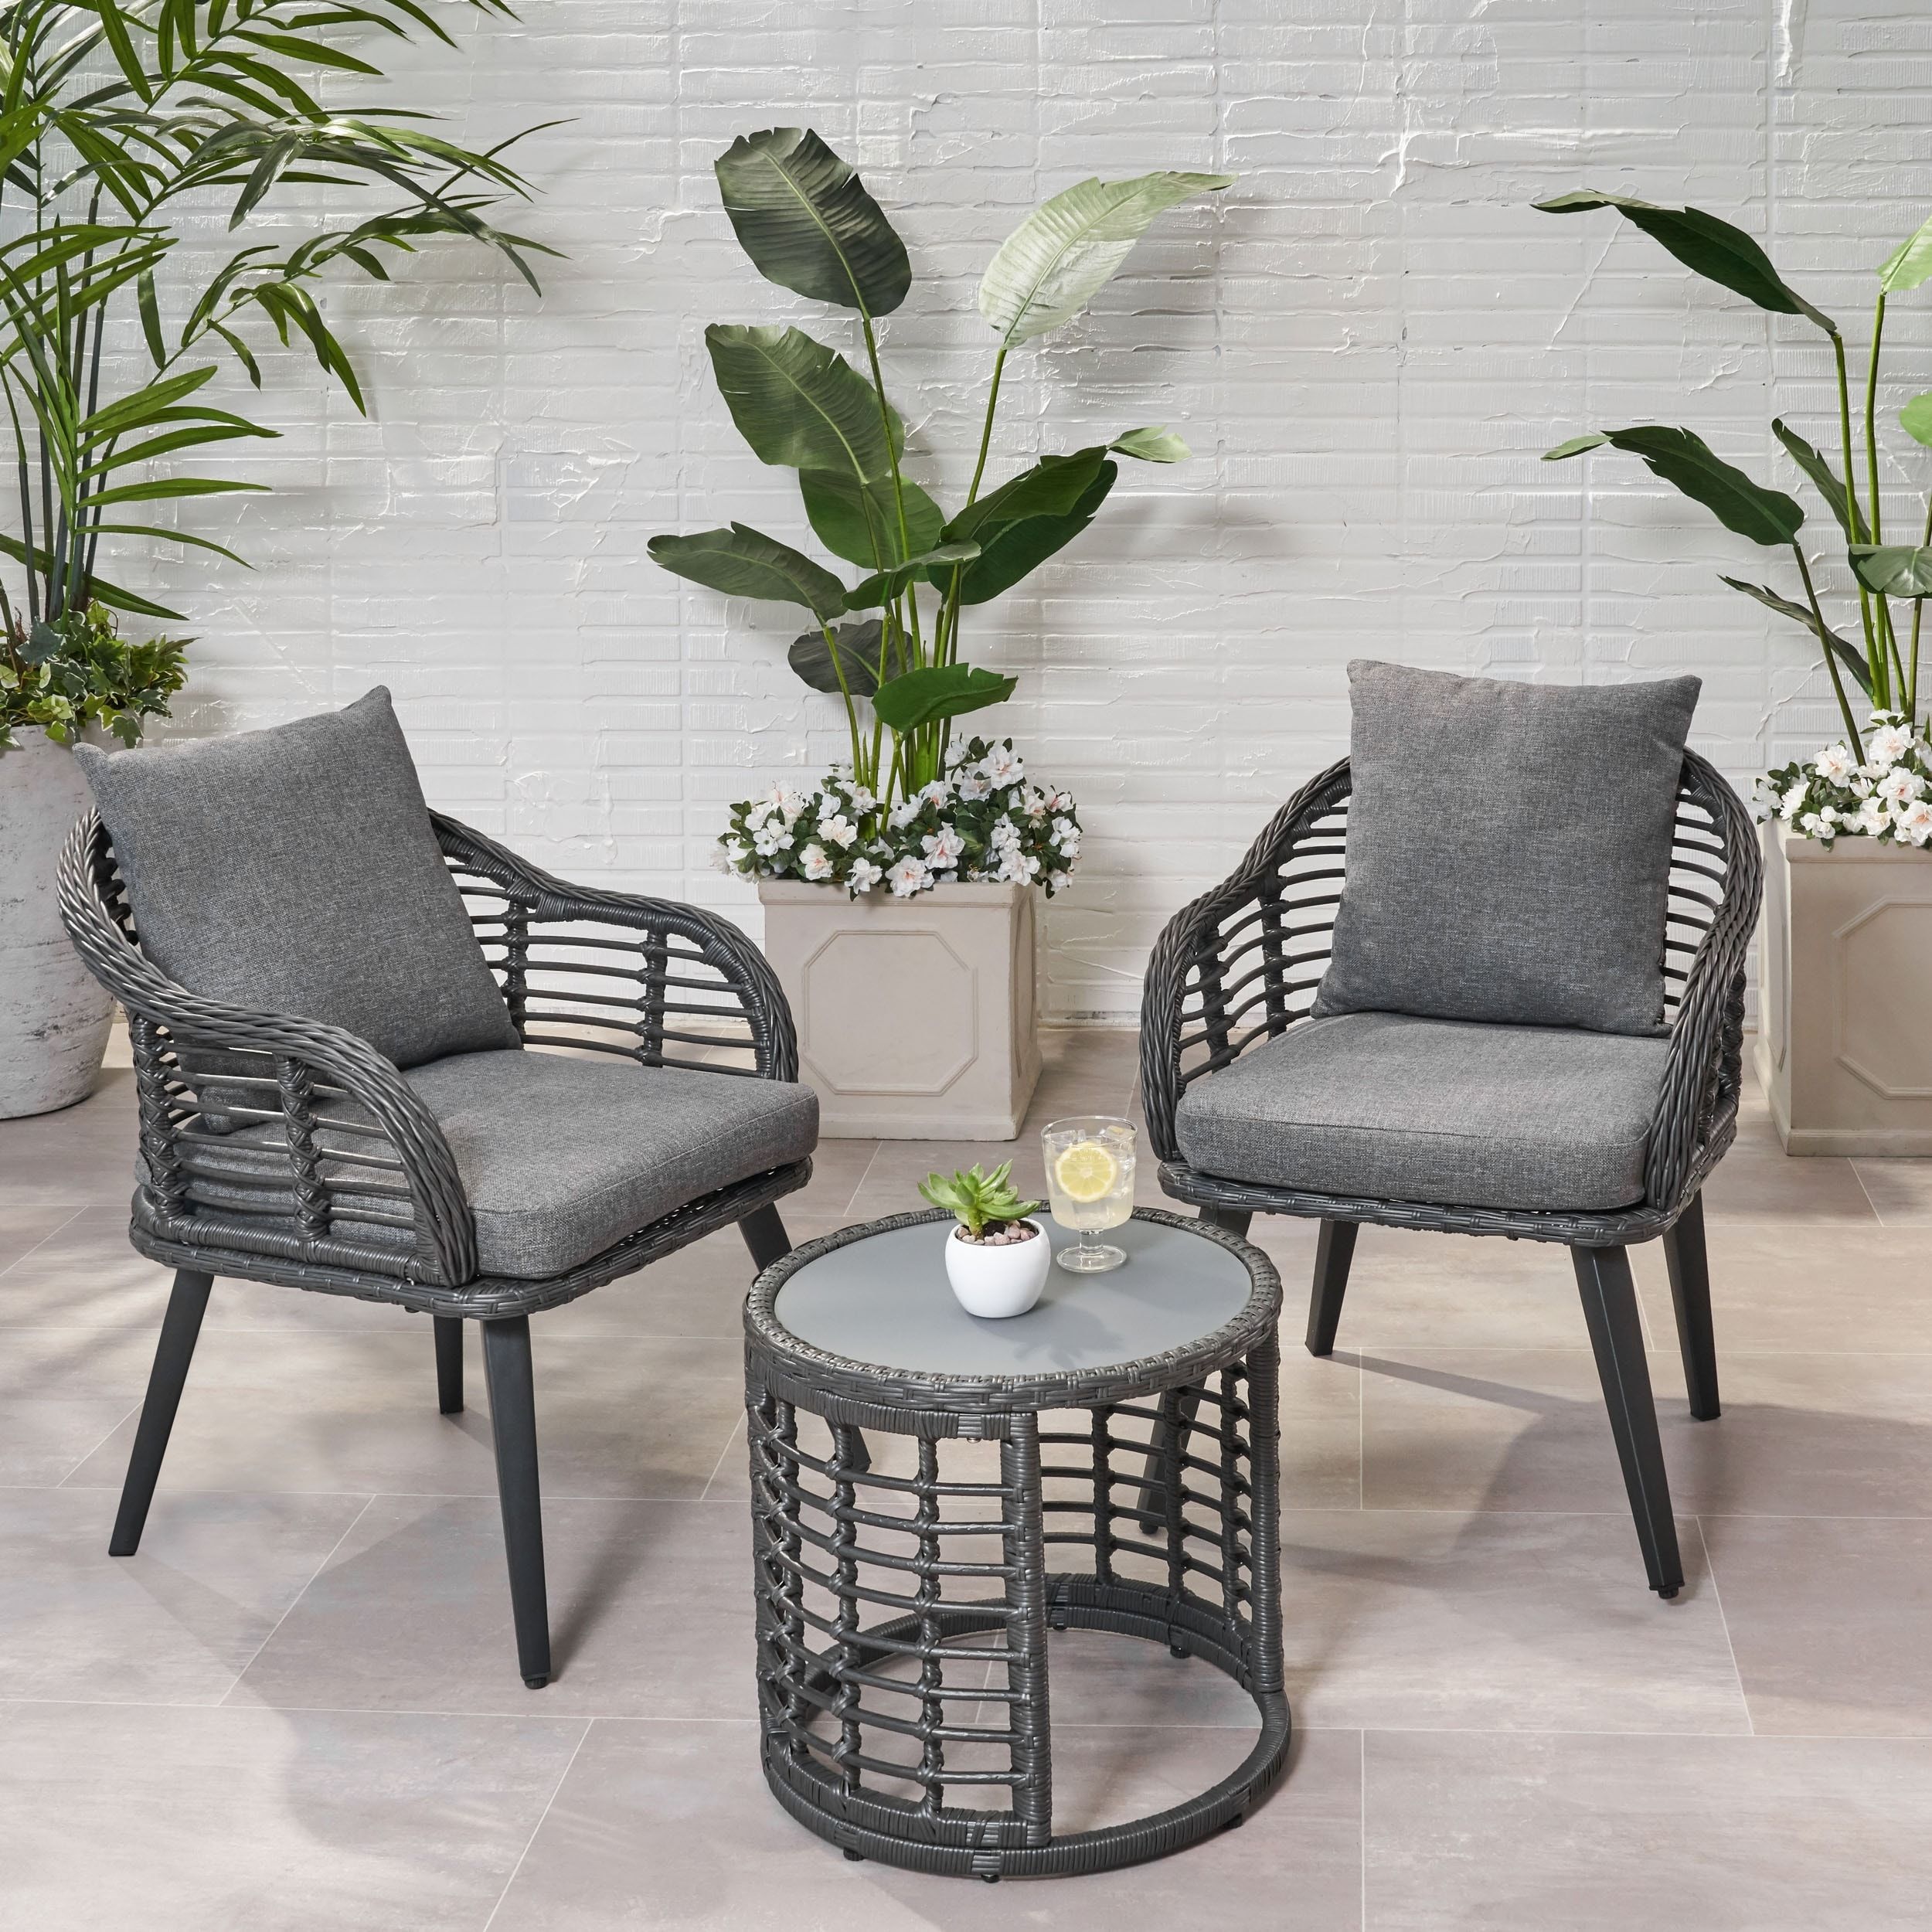 Tatiana Outdoor 3 Piece Boho Wicker Chat Setchristopher Knight Home –  Overstock – 28987059 Within 3 Piece Outdoor Boho Wicker Chat Set (View 4 of 15)